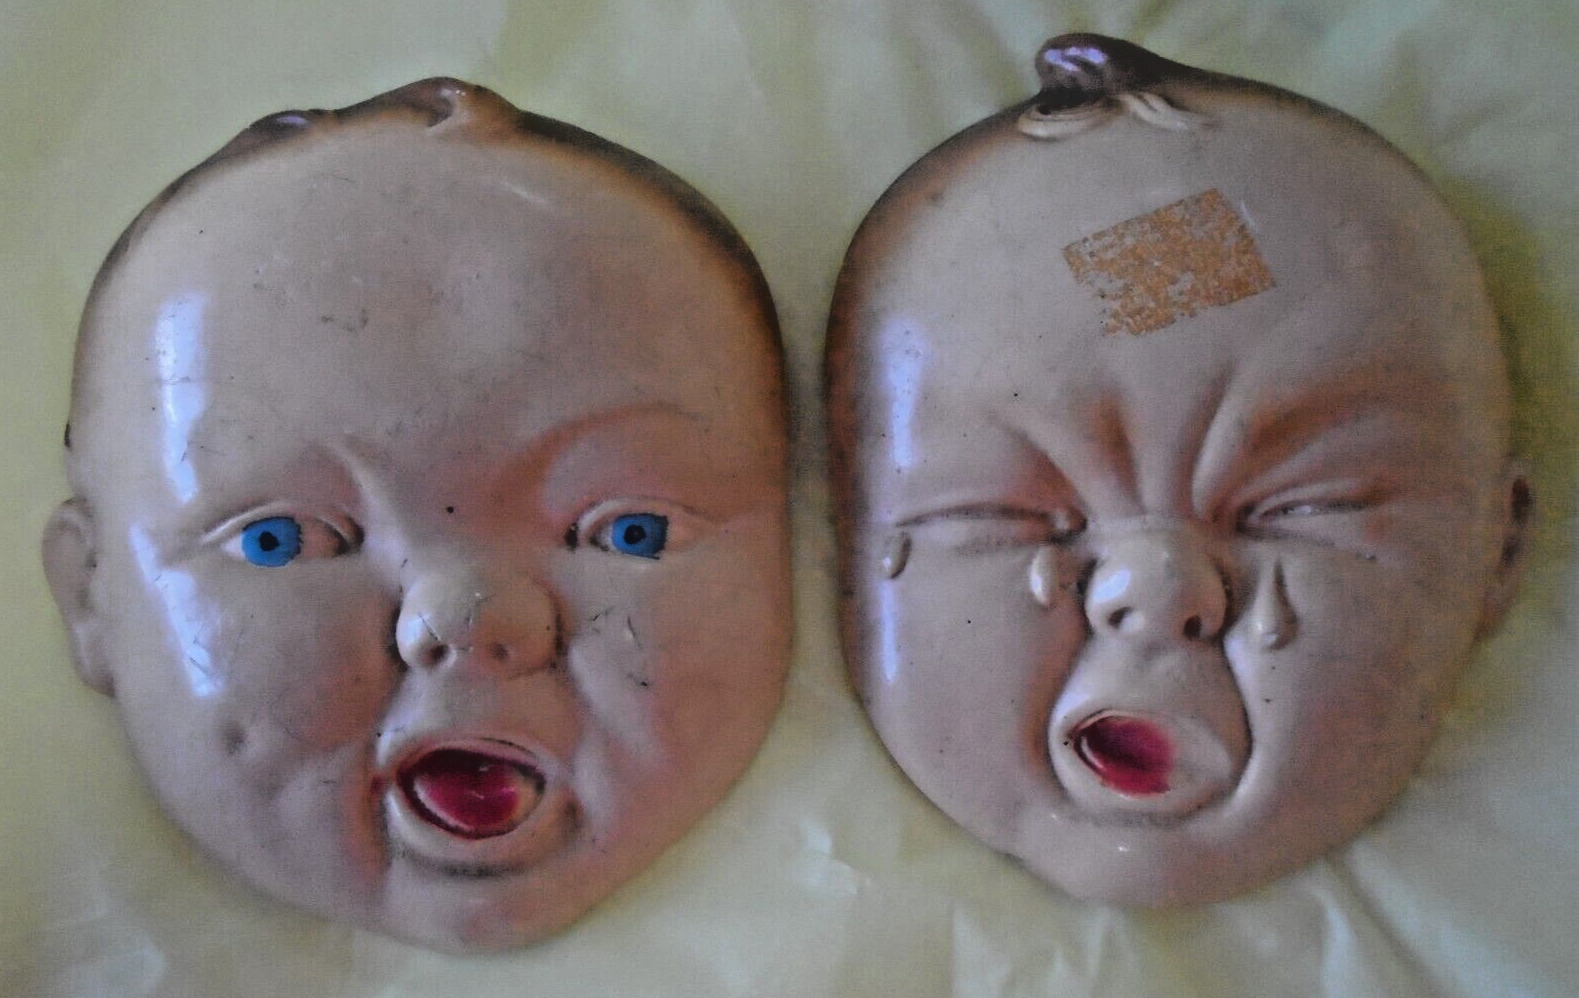 Vintage Pair Baby Face Chalkware Plaster Head Wall Plaques 1940s? 1 Crying 1 Not